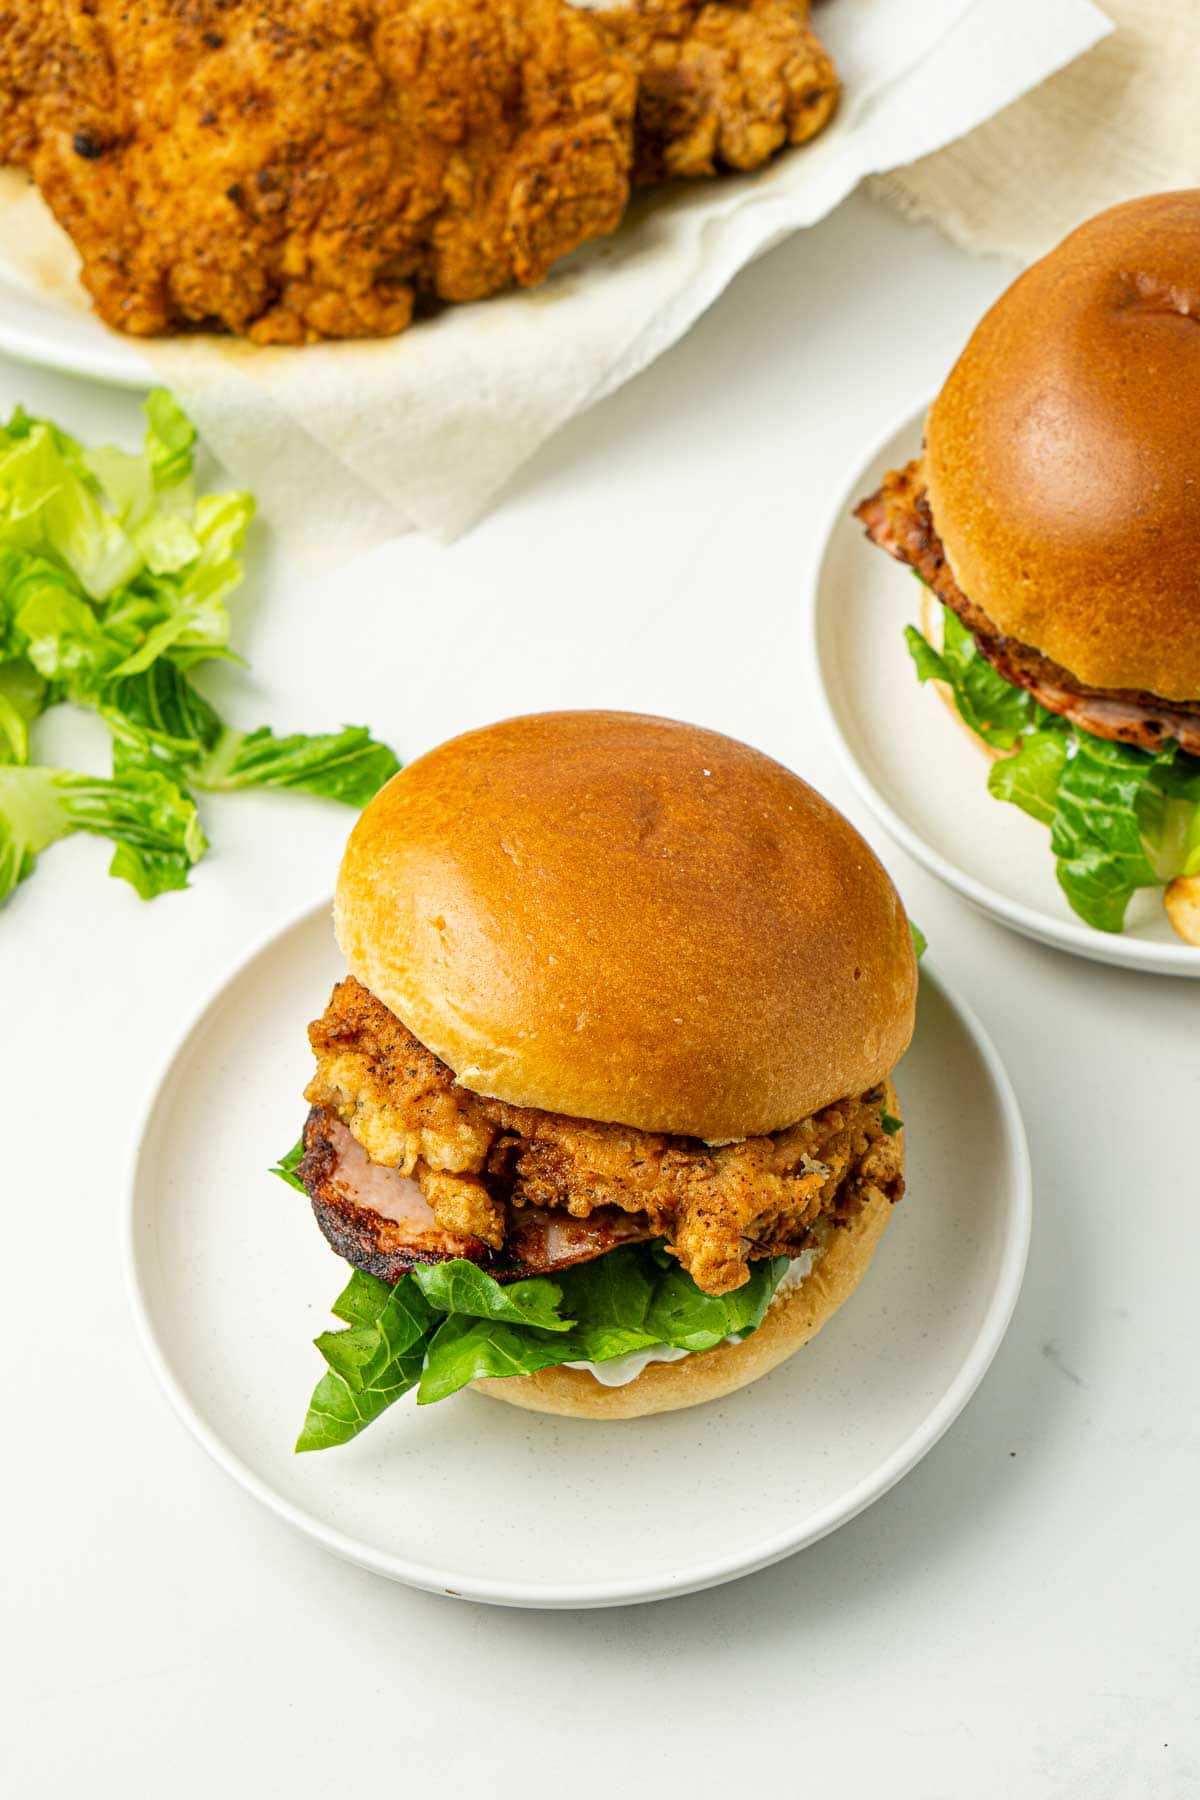 Two crispy chicken burgers on white plates with fried chicken in the background.